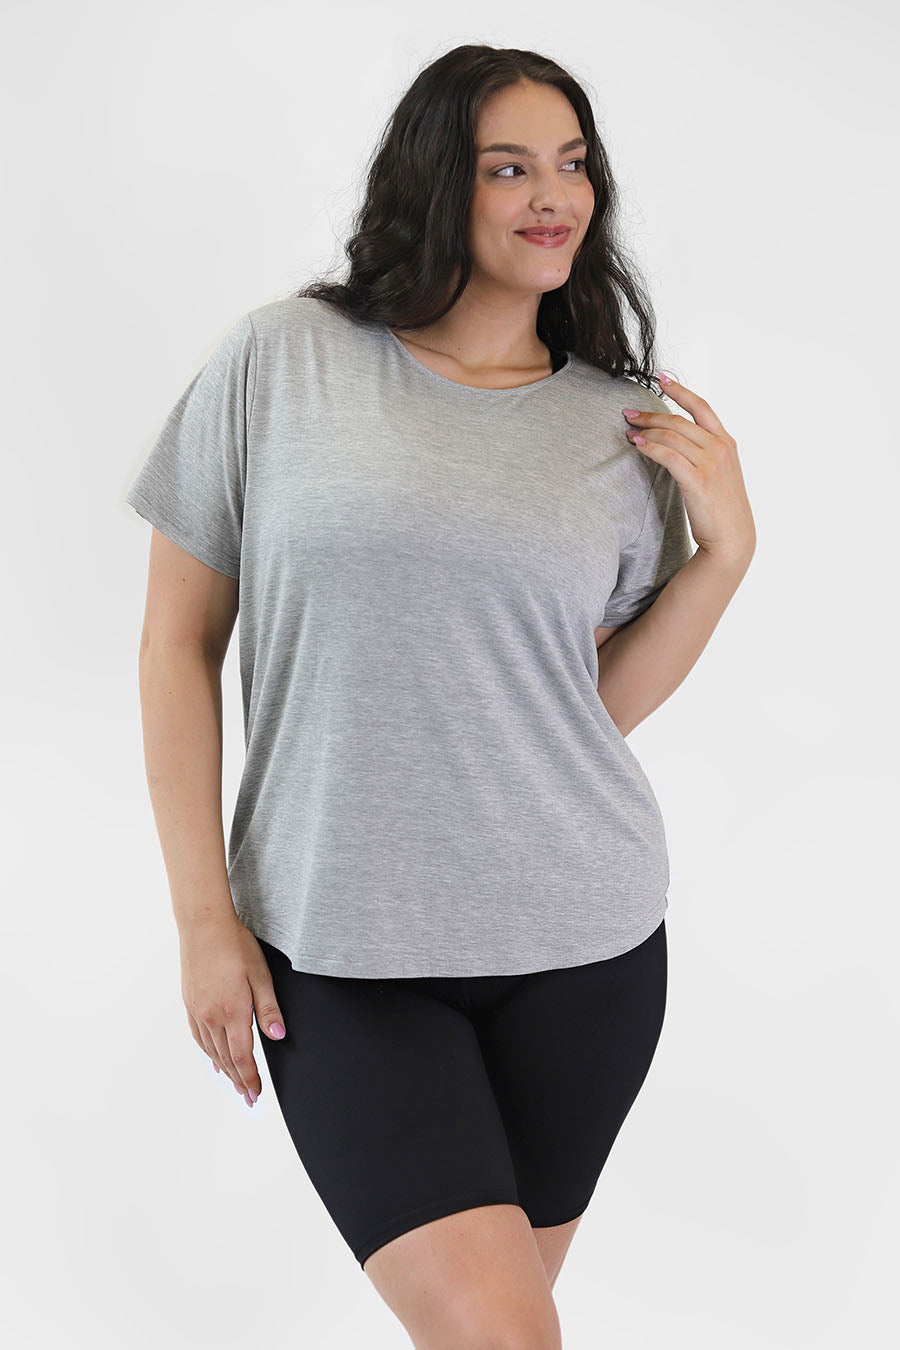 Classic Bamboo T-Shirt - Grey Marle from Active Truth™
